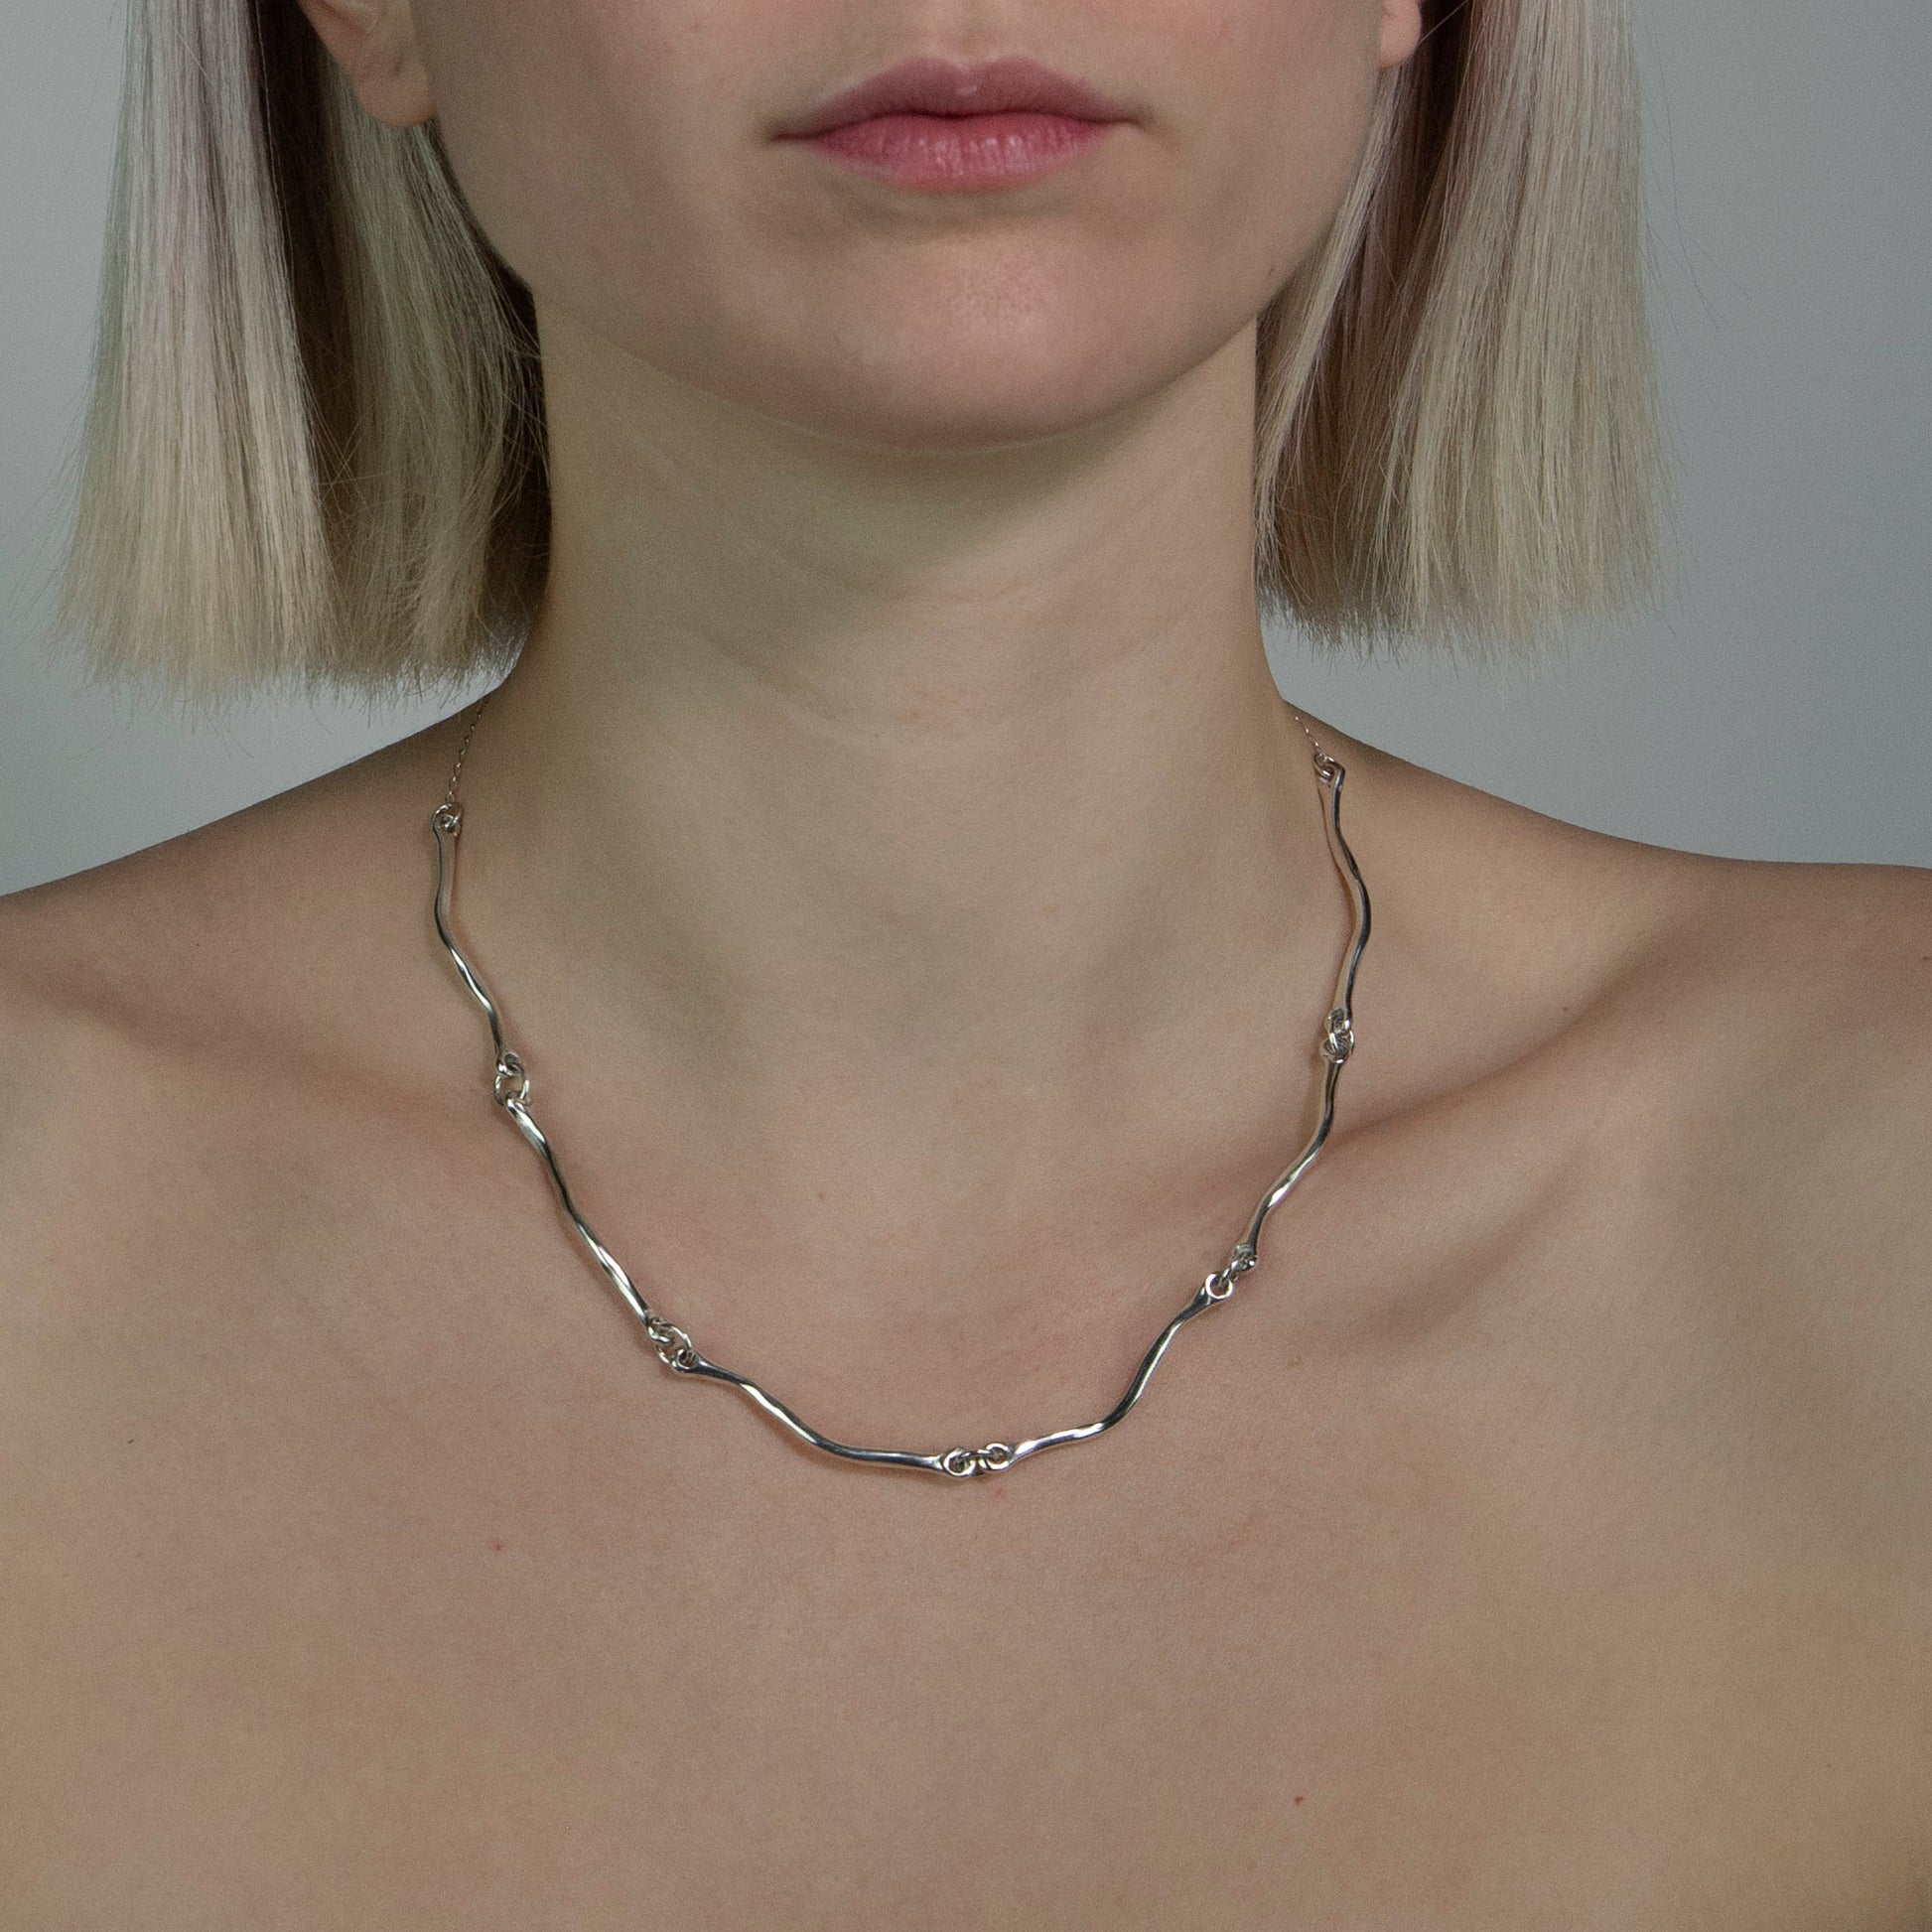 The Rogrande necklace is handmade and made of 925 sterling silver. It features small delicate wavy elements connected by rings, creating a smooth and shiny surface